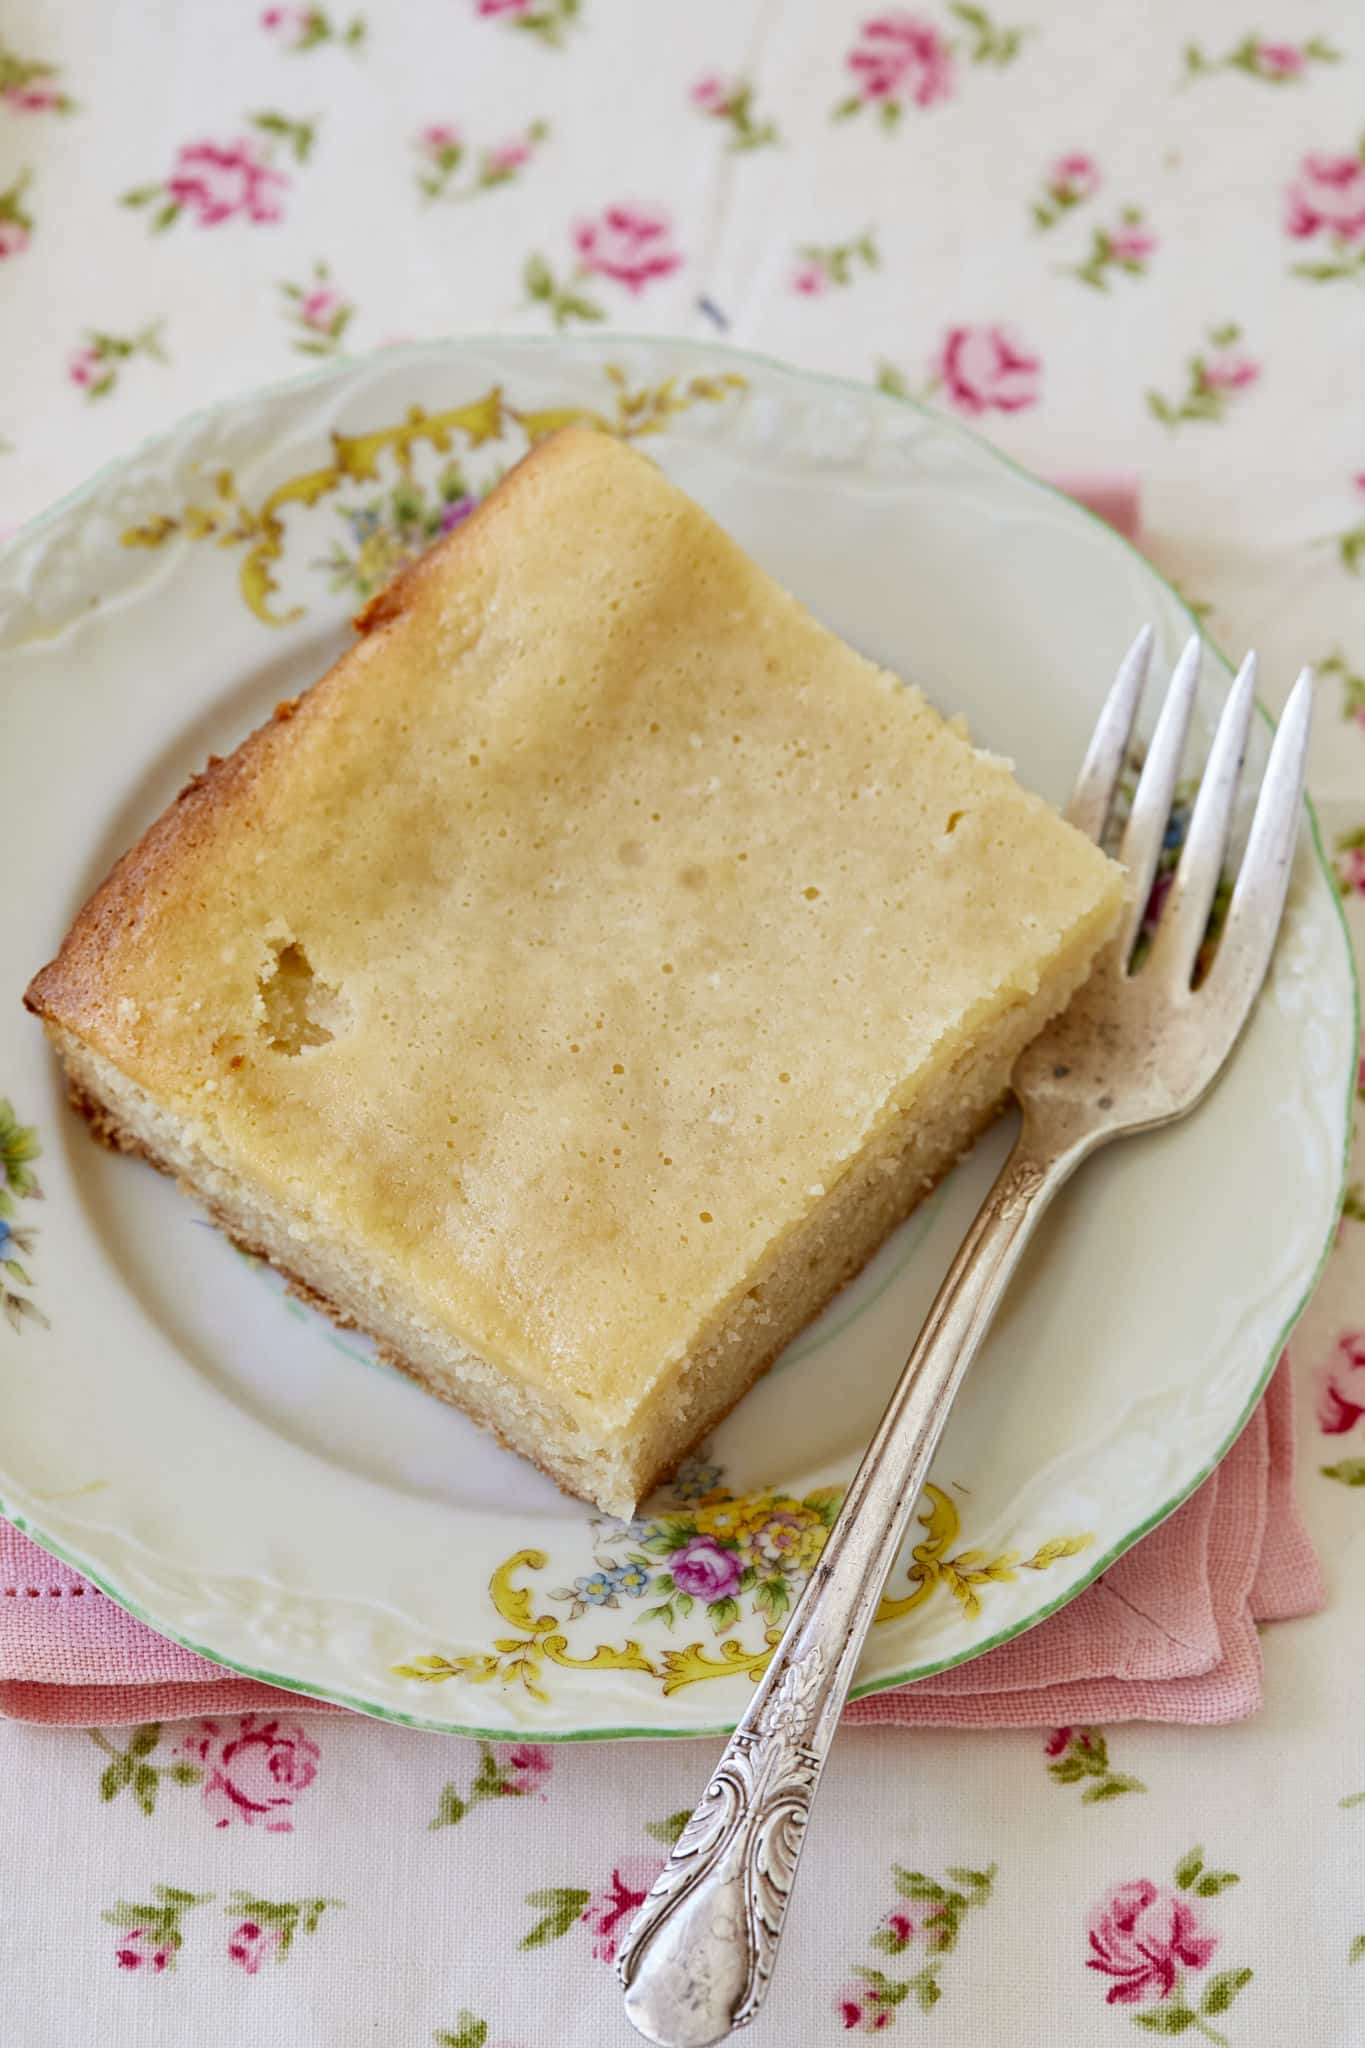 A close-up overhead shot of one piece of maple gooey butter cake on a vintage plate with a fork, on a pink napkin and floral tablecloth.